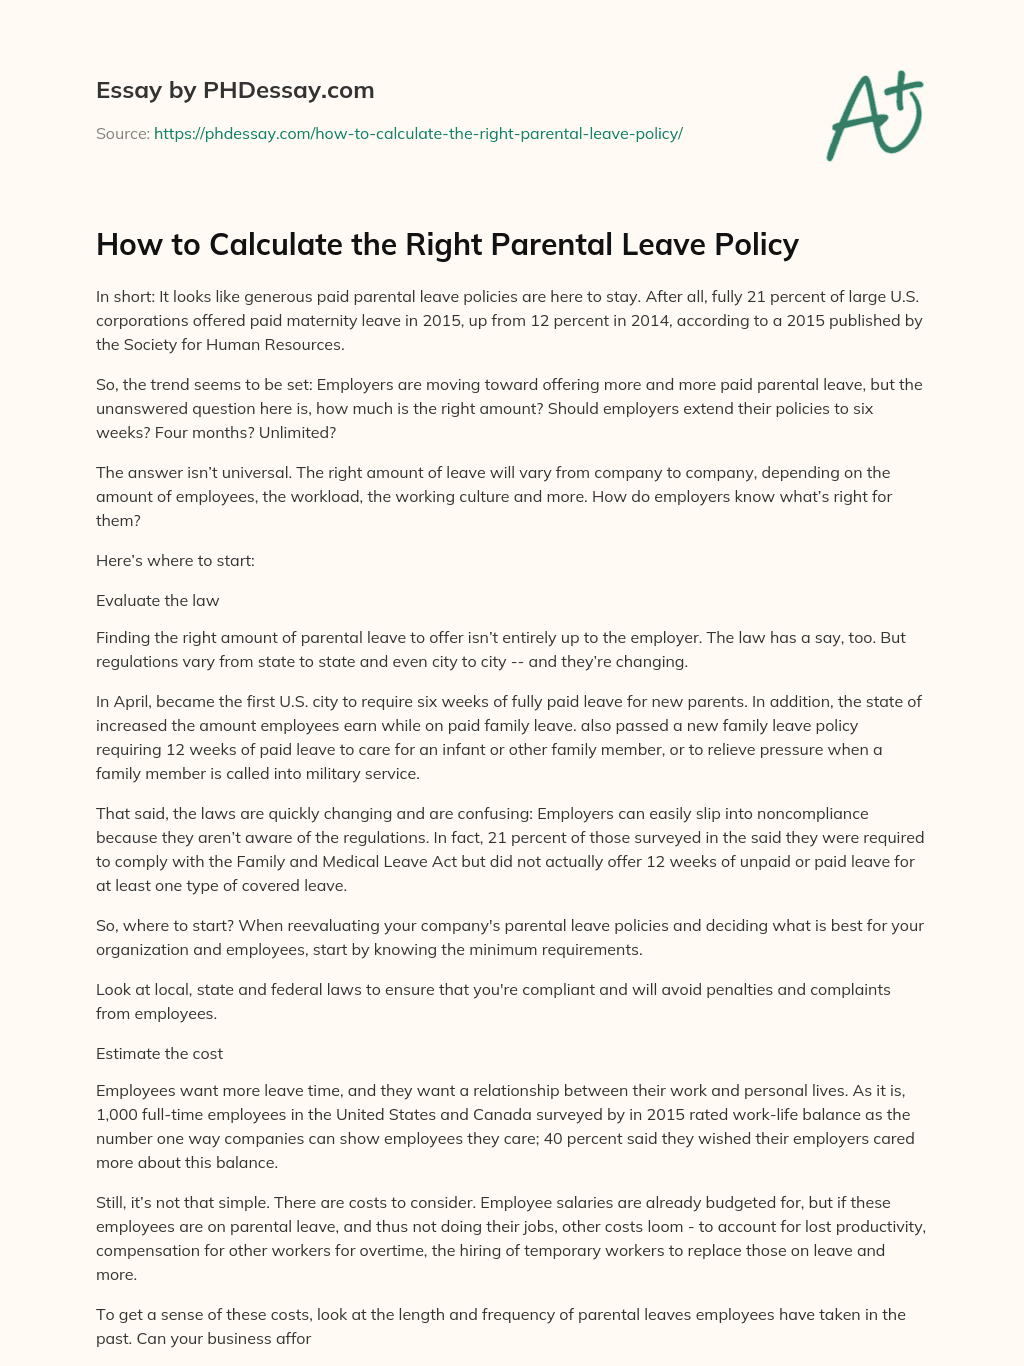 How to Calculate the Right Parental Leave Policy essay